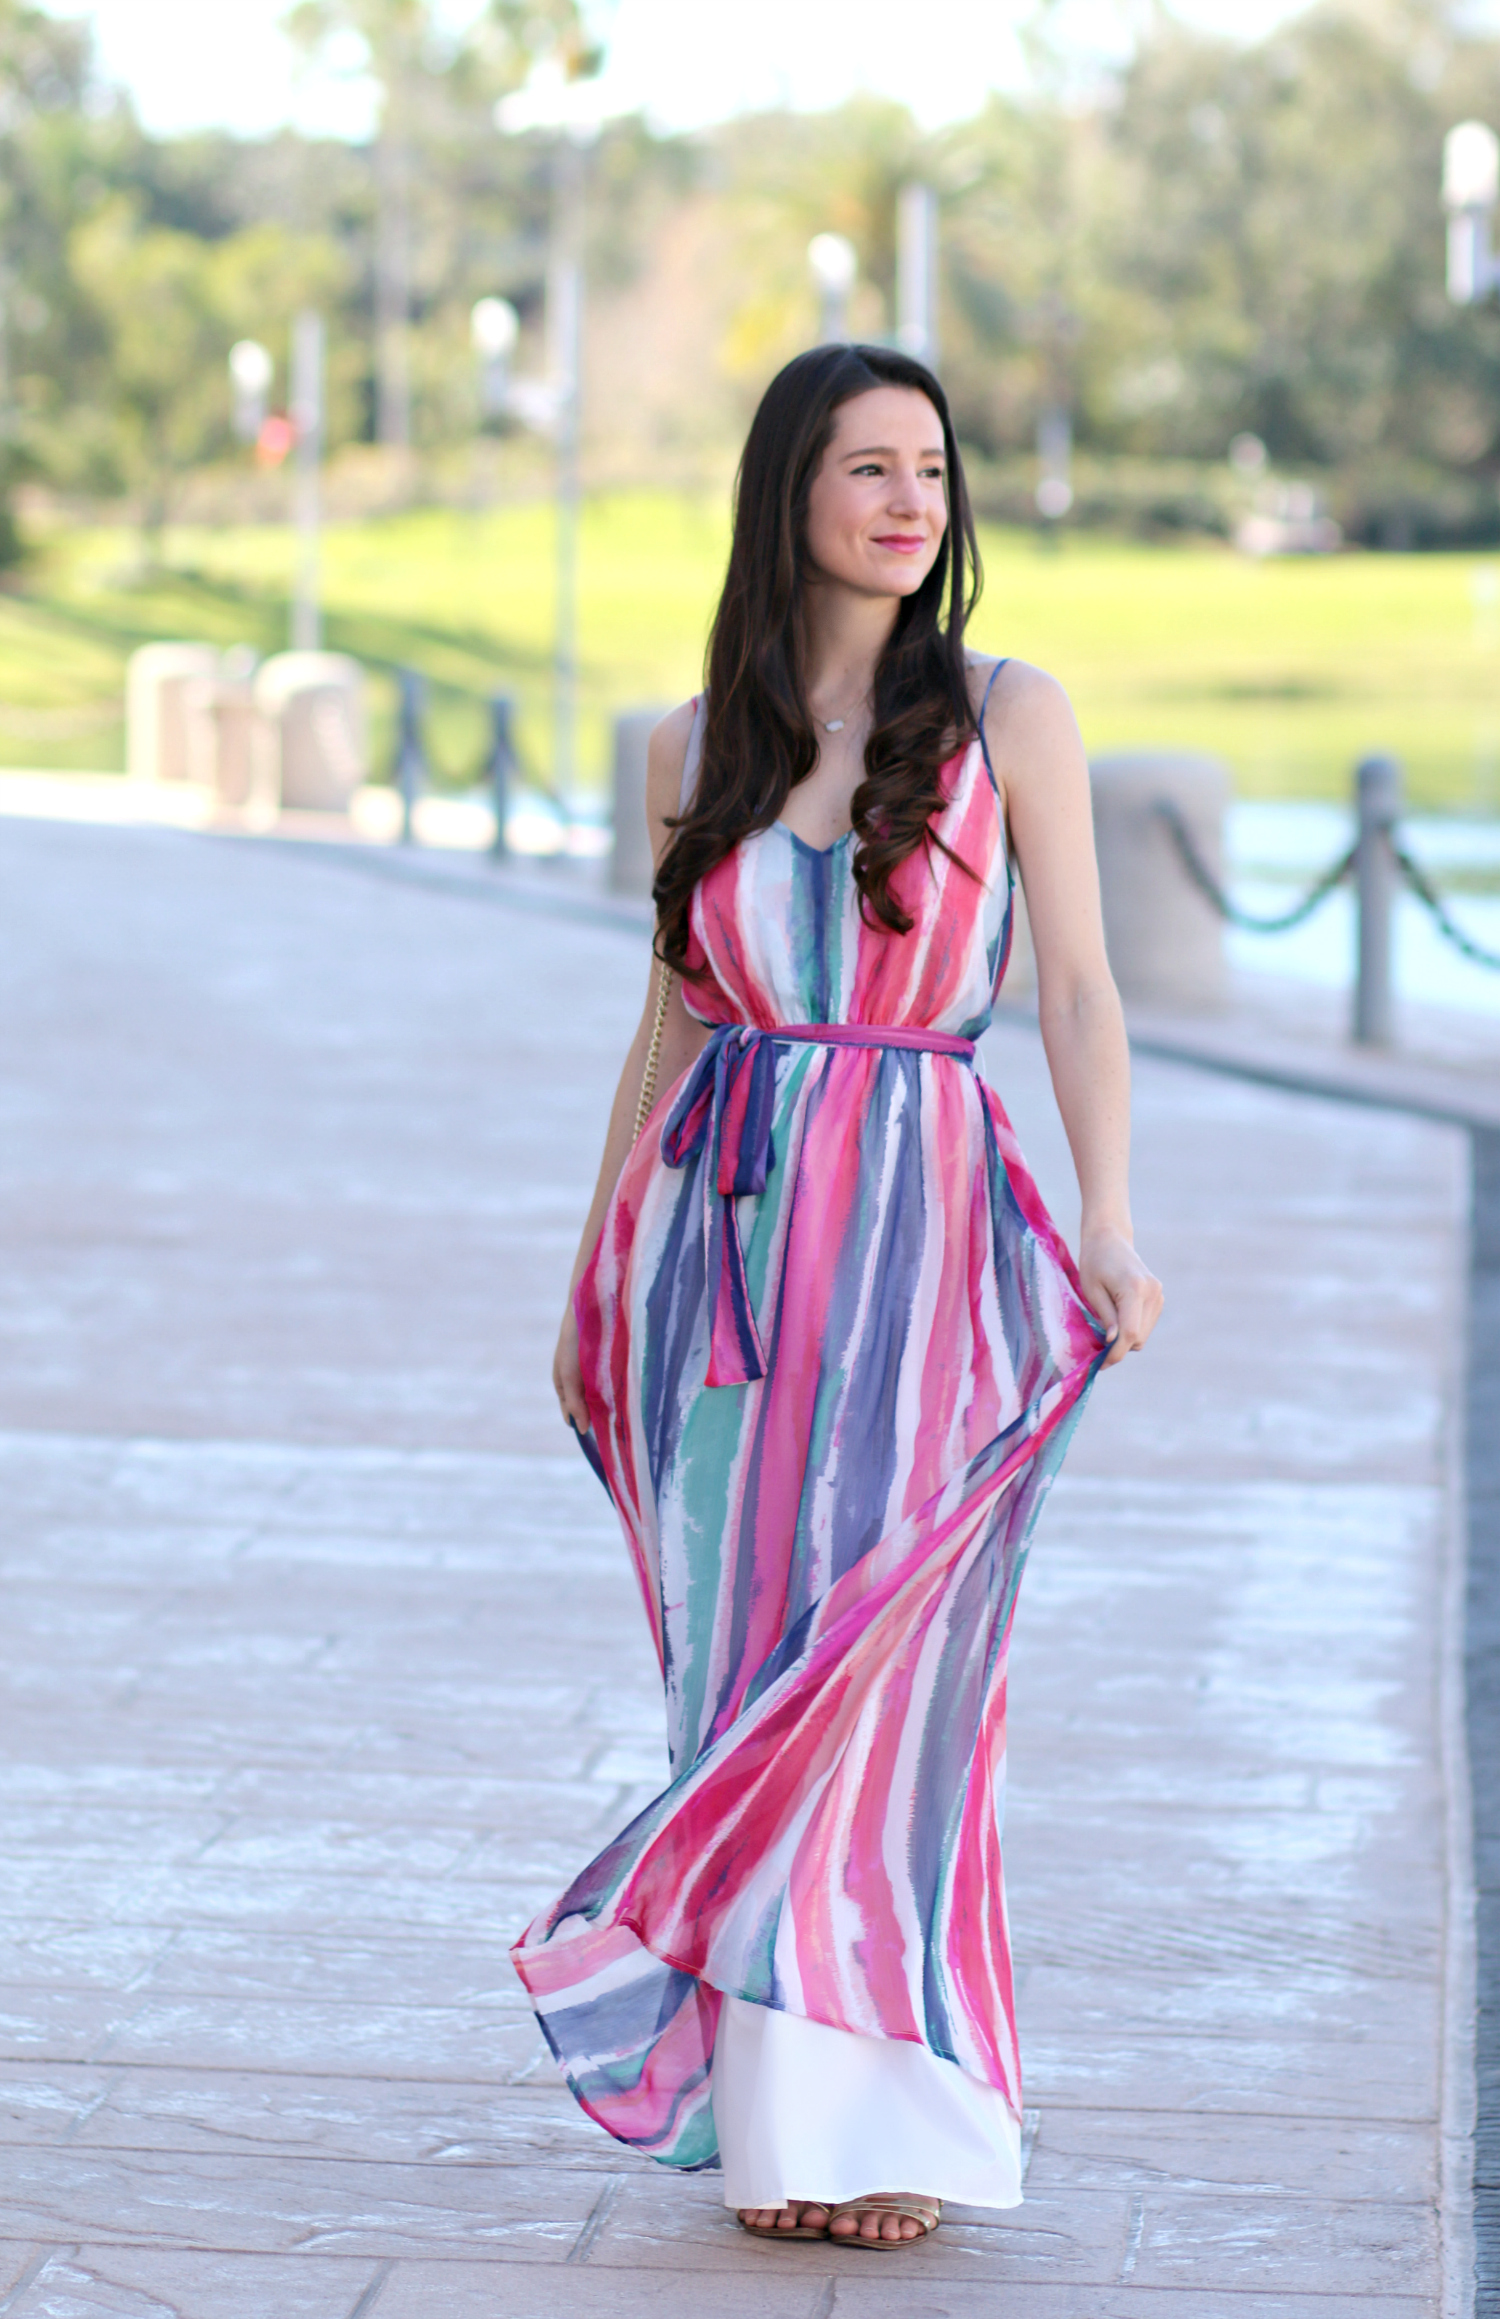 A colorful spring maxi dress from Jack by BB Dakota